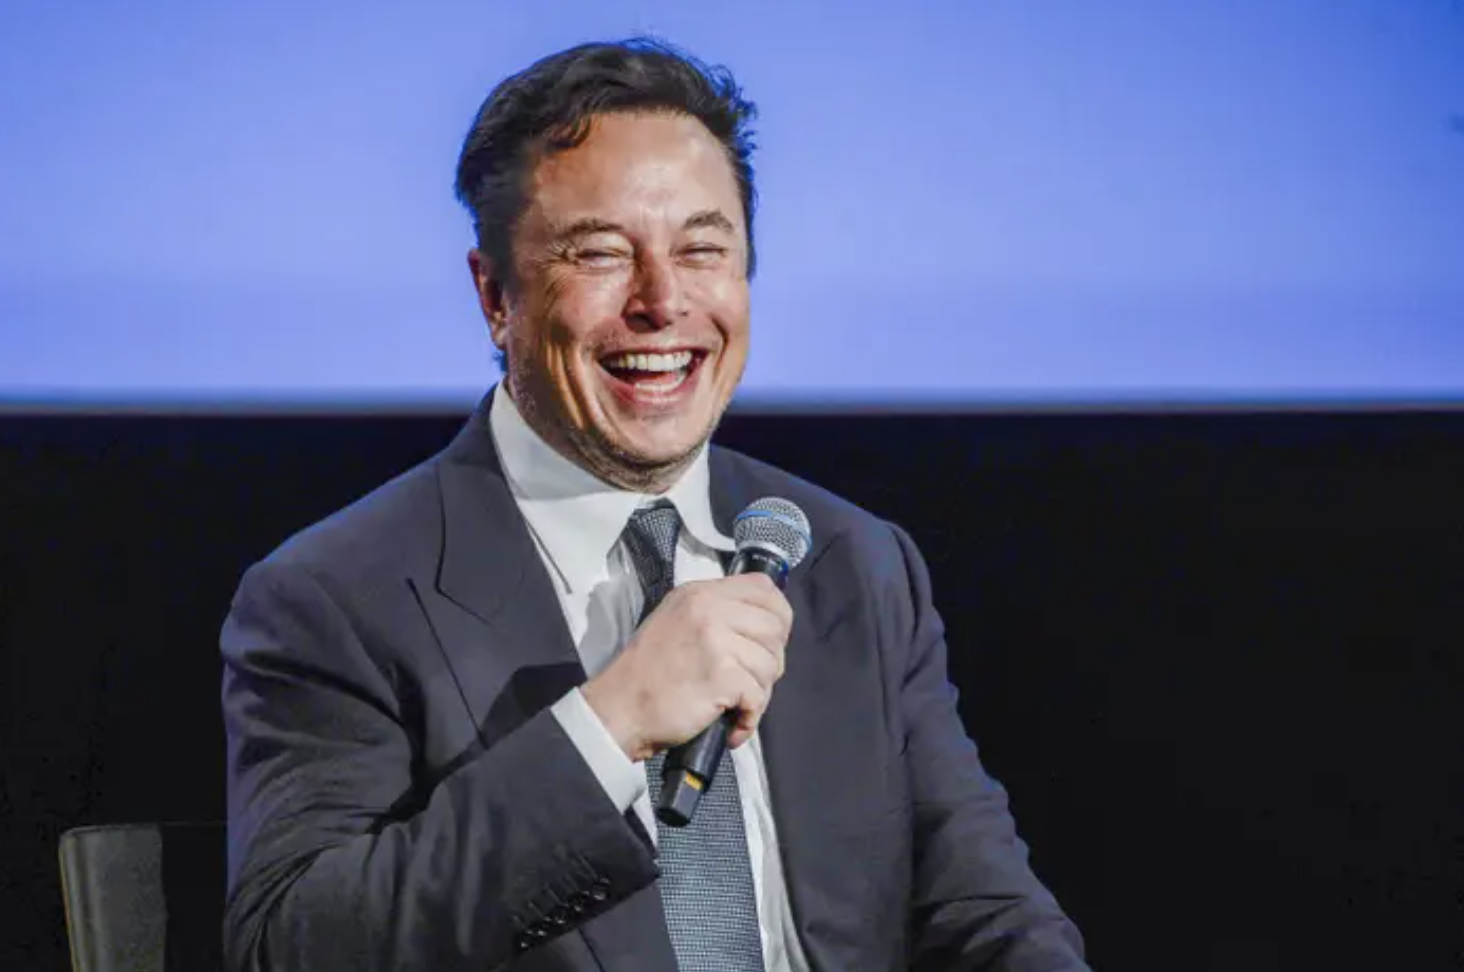 Elon Musk wearing a suit, holding a microphone and laughing